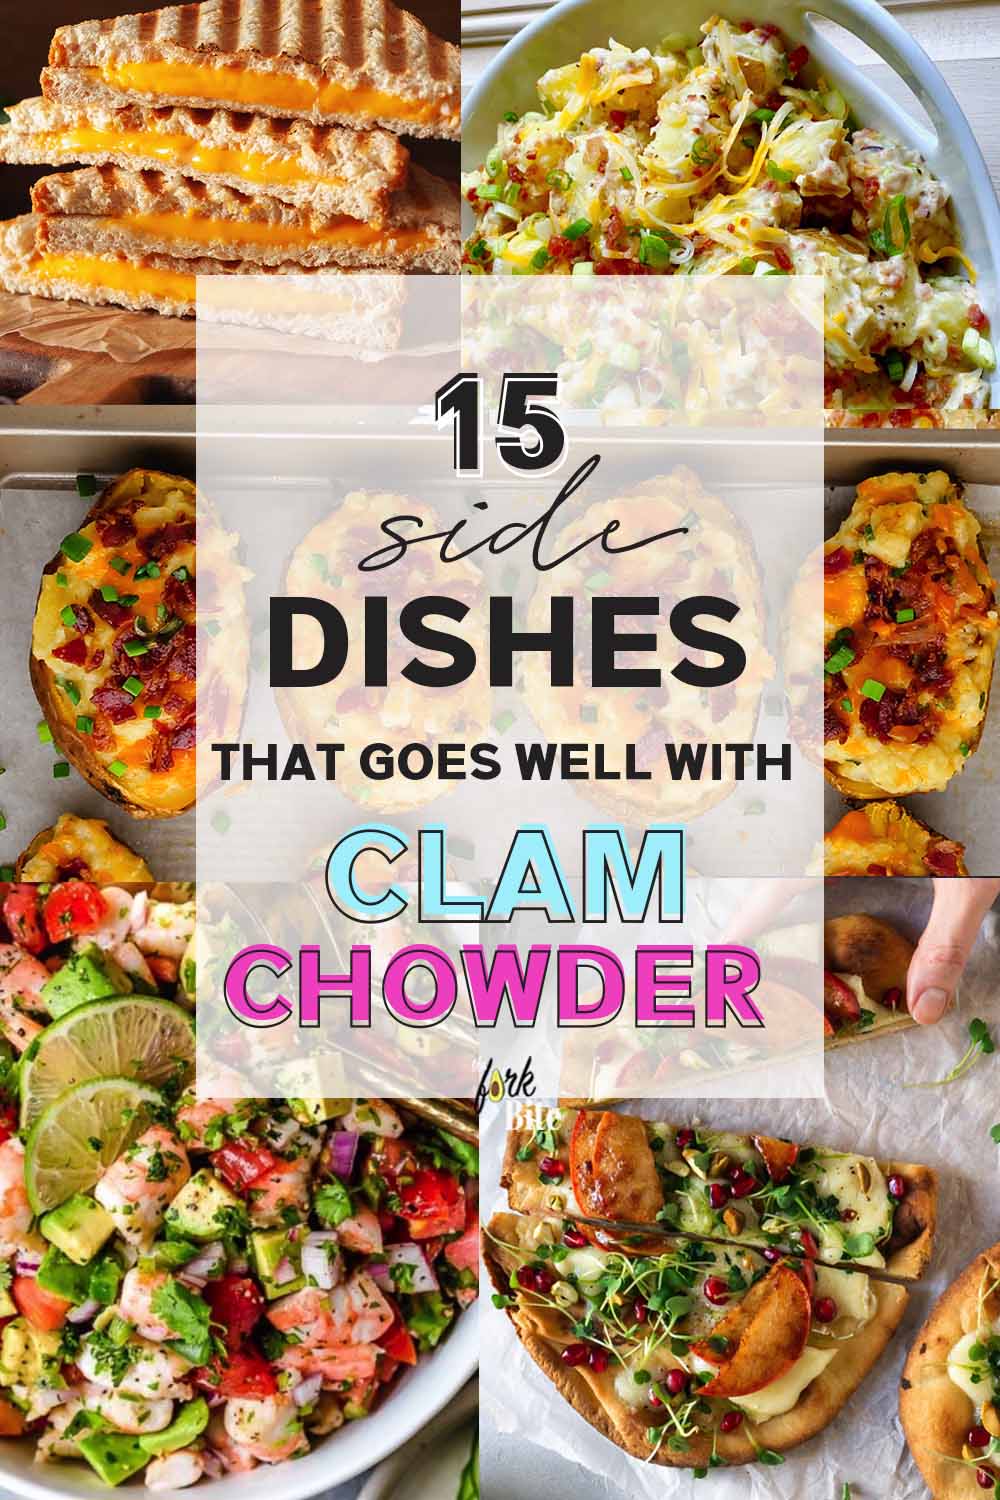 Looking for something to turn a simple clam chowder into a more filling meal? Here are 15 side dishes that go well with clam chowder..